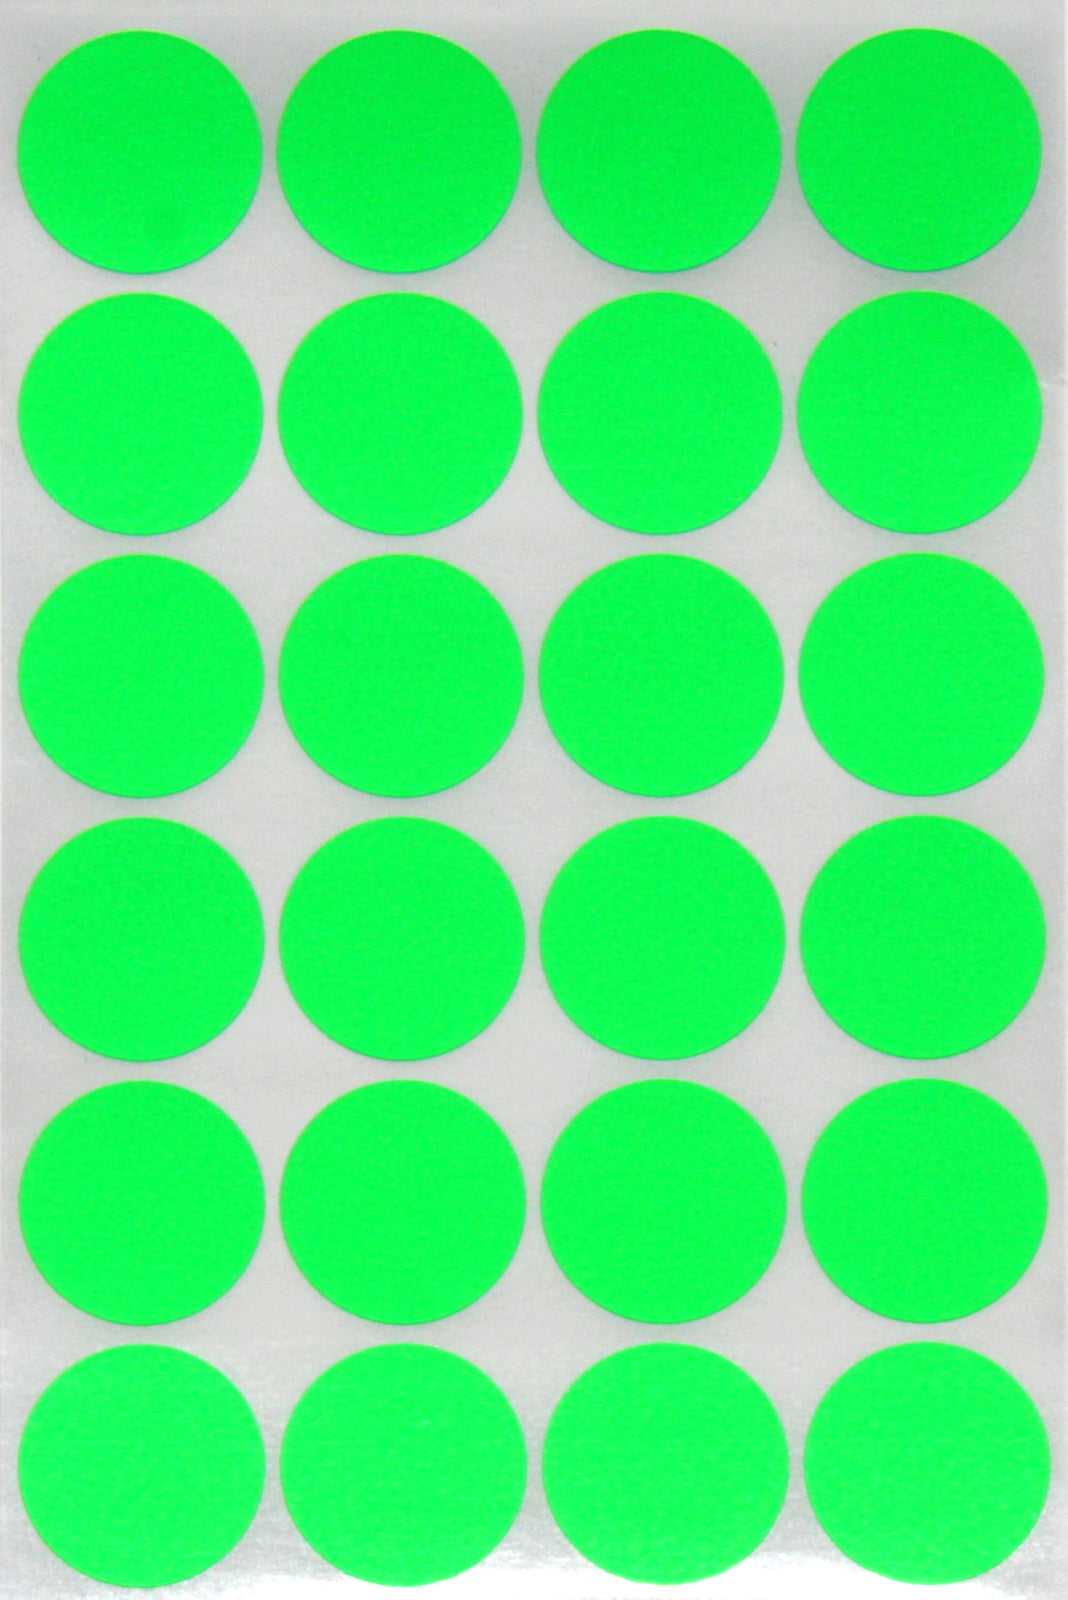 Dot stickers 1 inch Neon colors 25mm – Royal Green Market